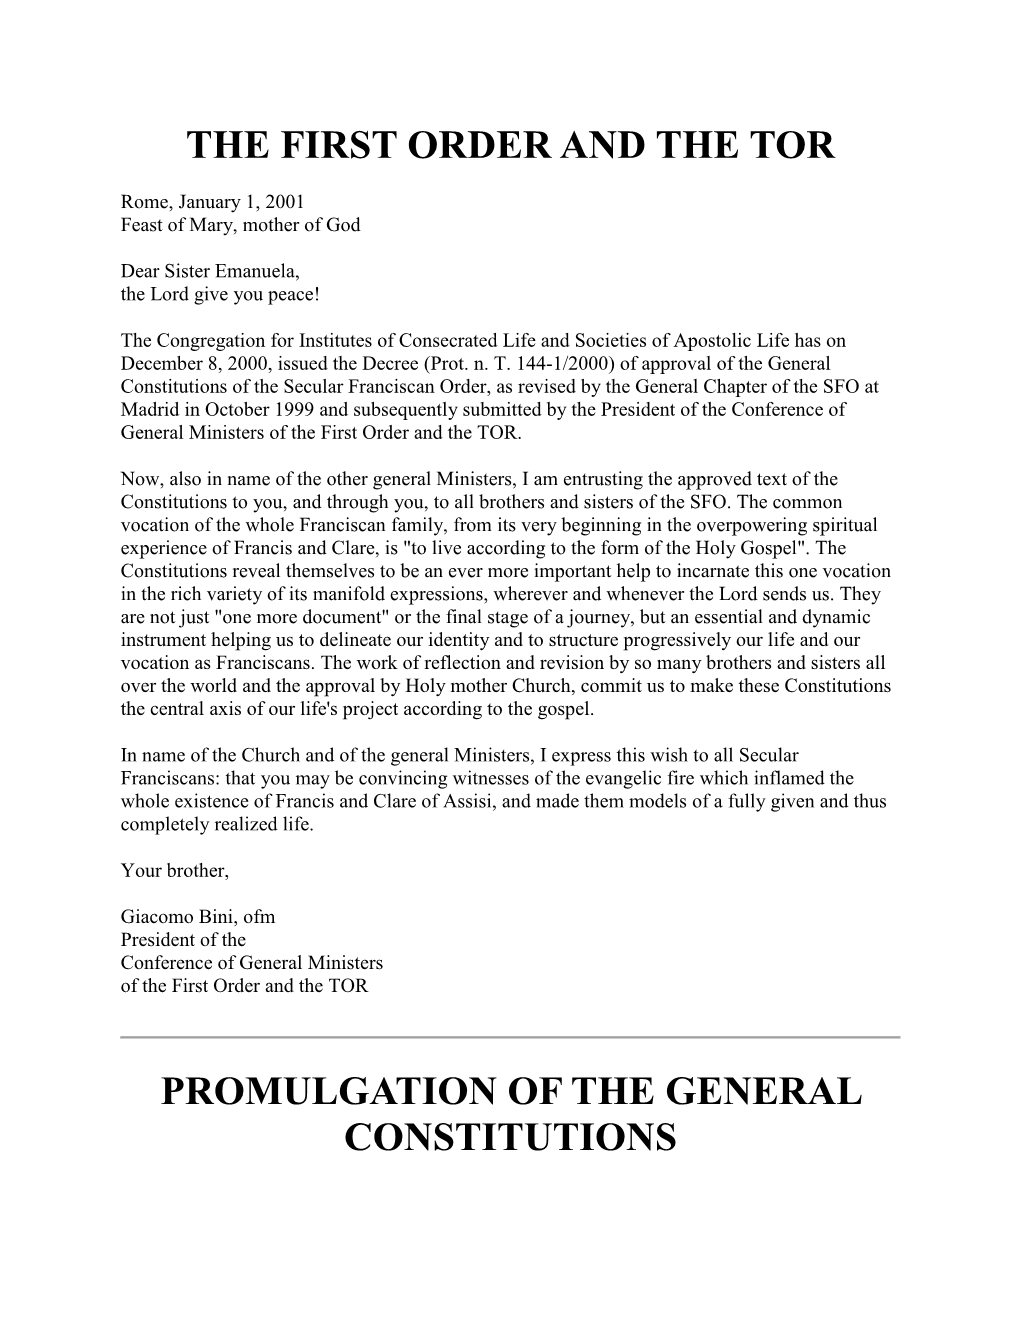 General Constitutions of the Secular Franciscan Order